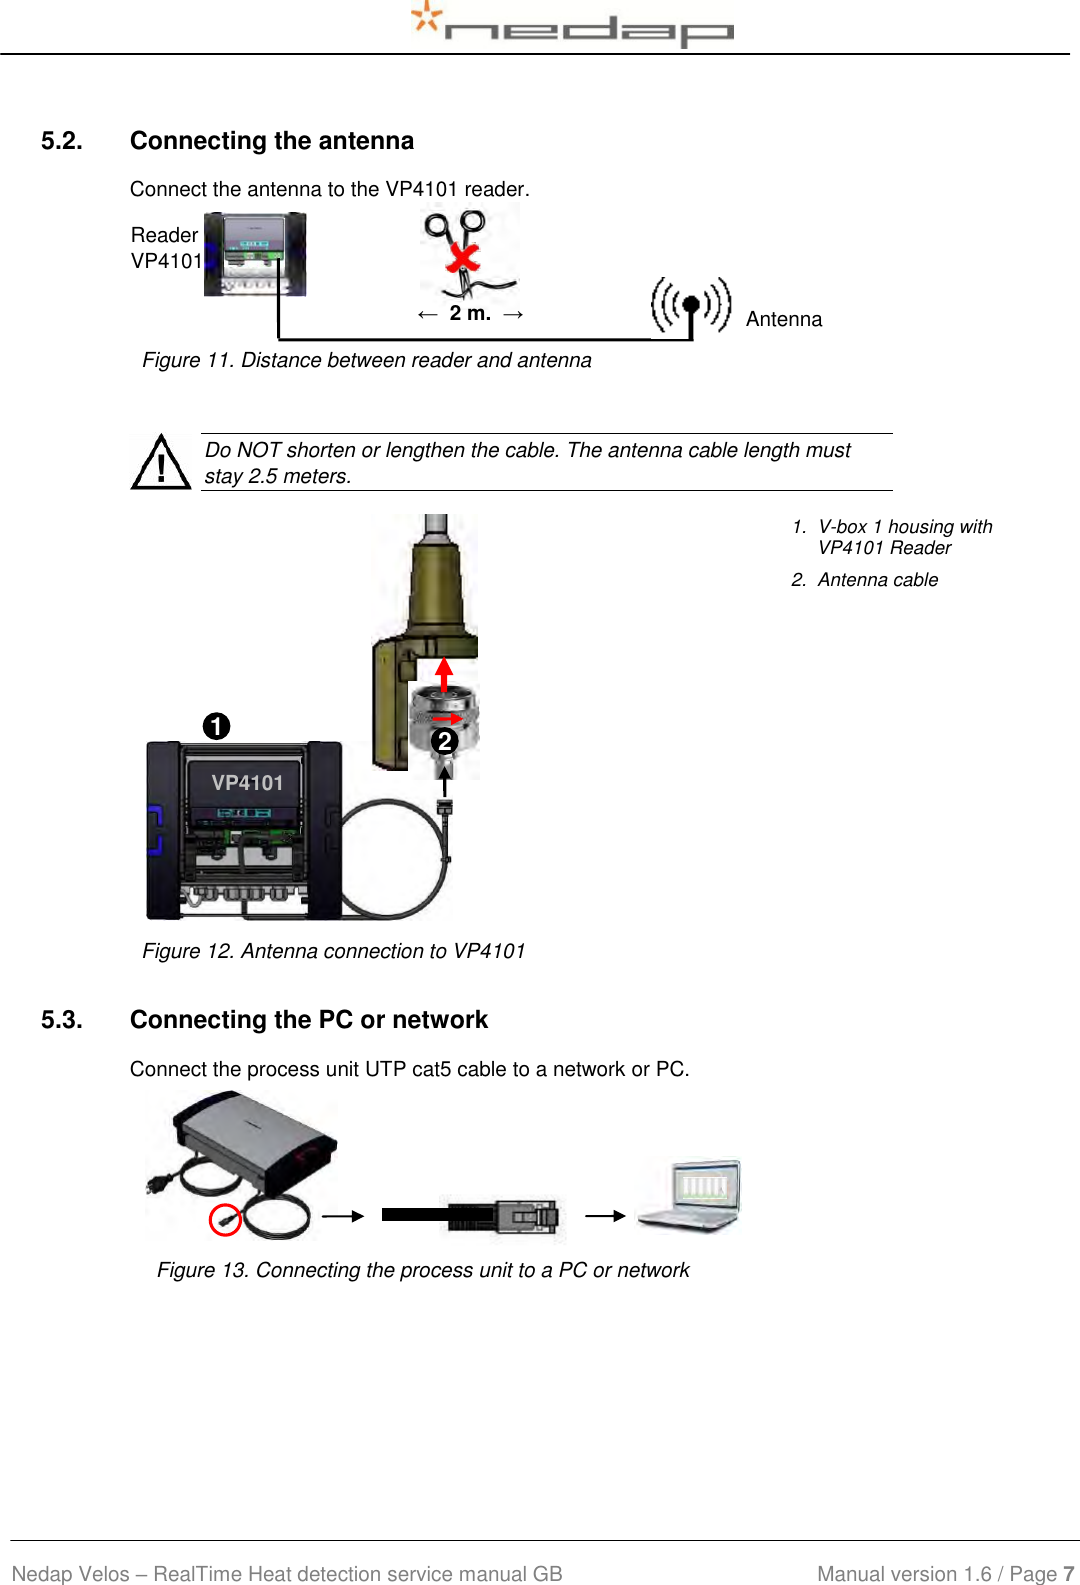  Nedap Velos – RealTime Heat detection service manual GB                            Manual version 1.6 / Page 7  5.2.  Connecting the antenna  Connect the antenna to the VP4101 reader.    Figure 11. Distance between reader and antenna     Do NOT shorten or lengthen the cable. The antenna cable length must stay 2.5 meters.               1.  V-box 1 housing with VP4101 Reader 2.  Antenna cable  Figure 12. Antenna connection to VP4101 5.3.  Connecting the PC or network Connect the process unit UTP cat5 cable to a network or PC.               Figure 13. Connecting the process unit to a PC or network  Antenna ←  2 m.  → Reader VP4101 2 Length of corridor (m) 1 Length of corridor (m) VP4101 